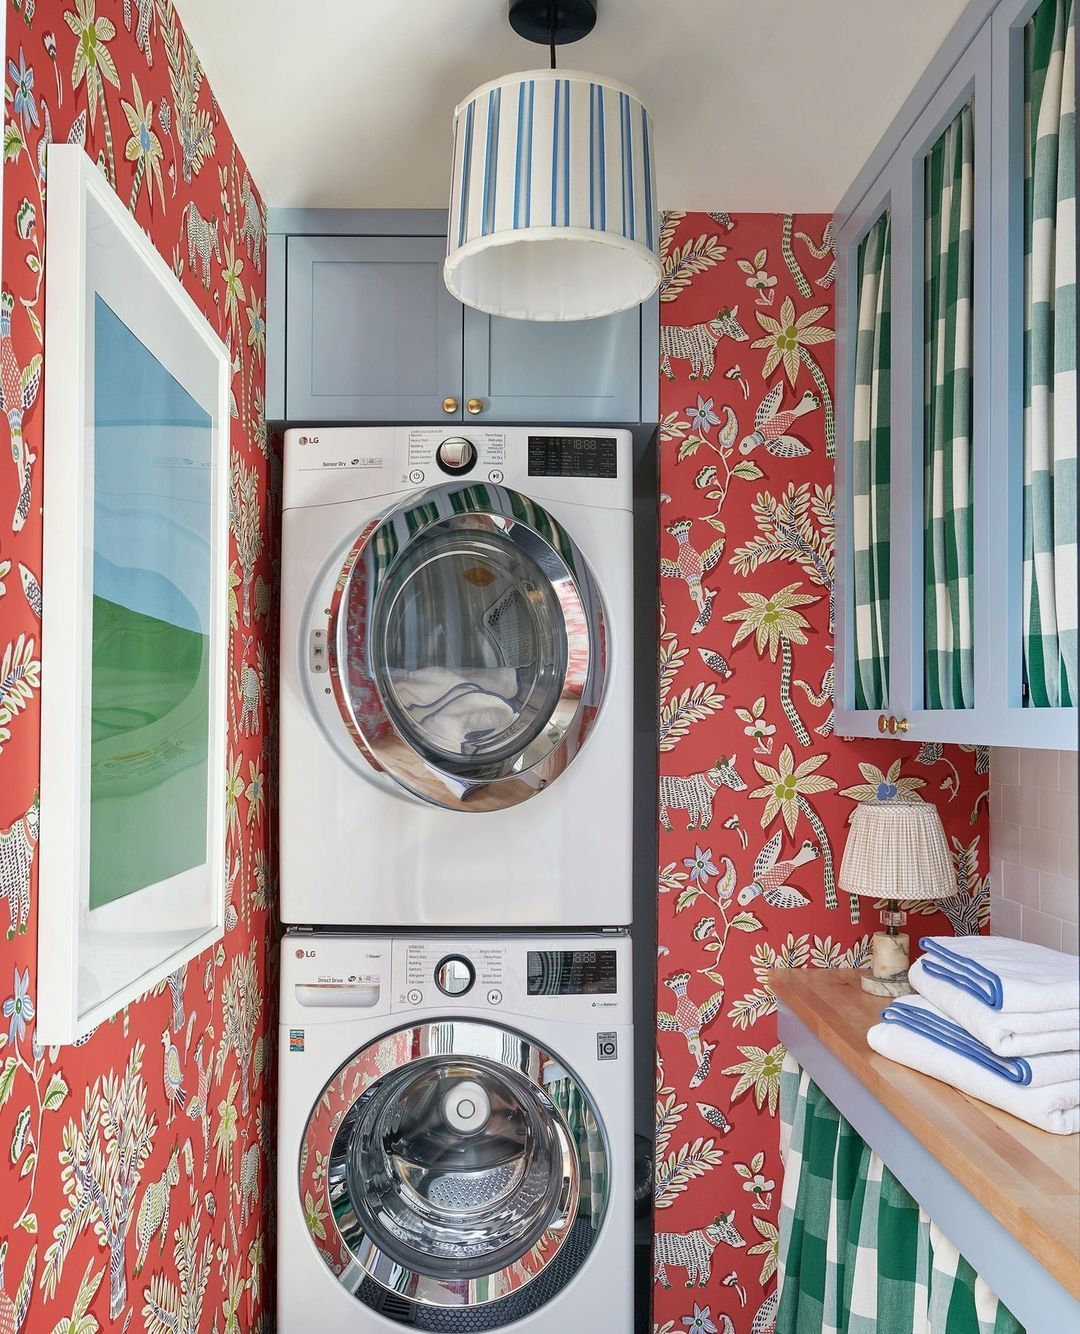 Eclectic Patterns for a Vibrant Laundry Space